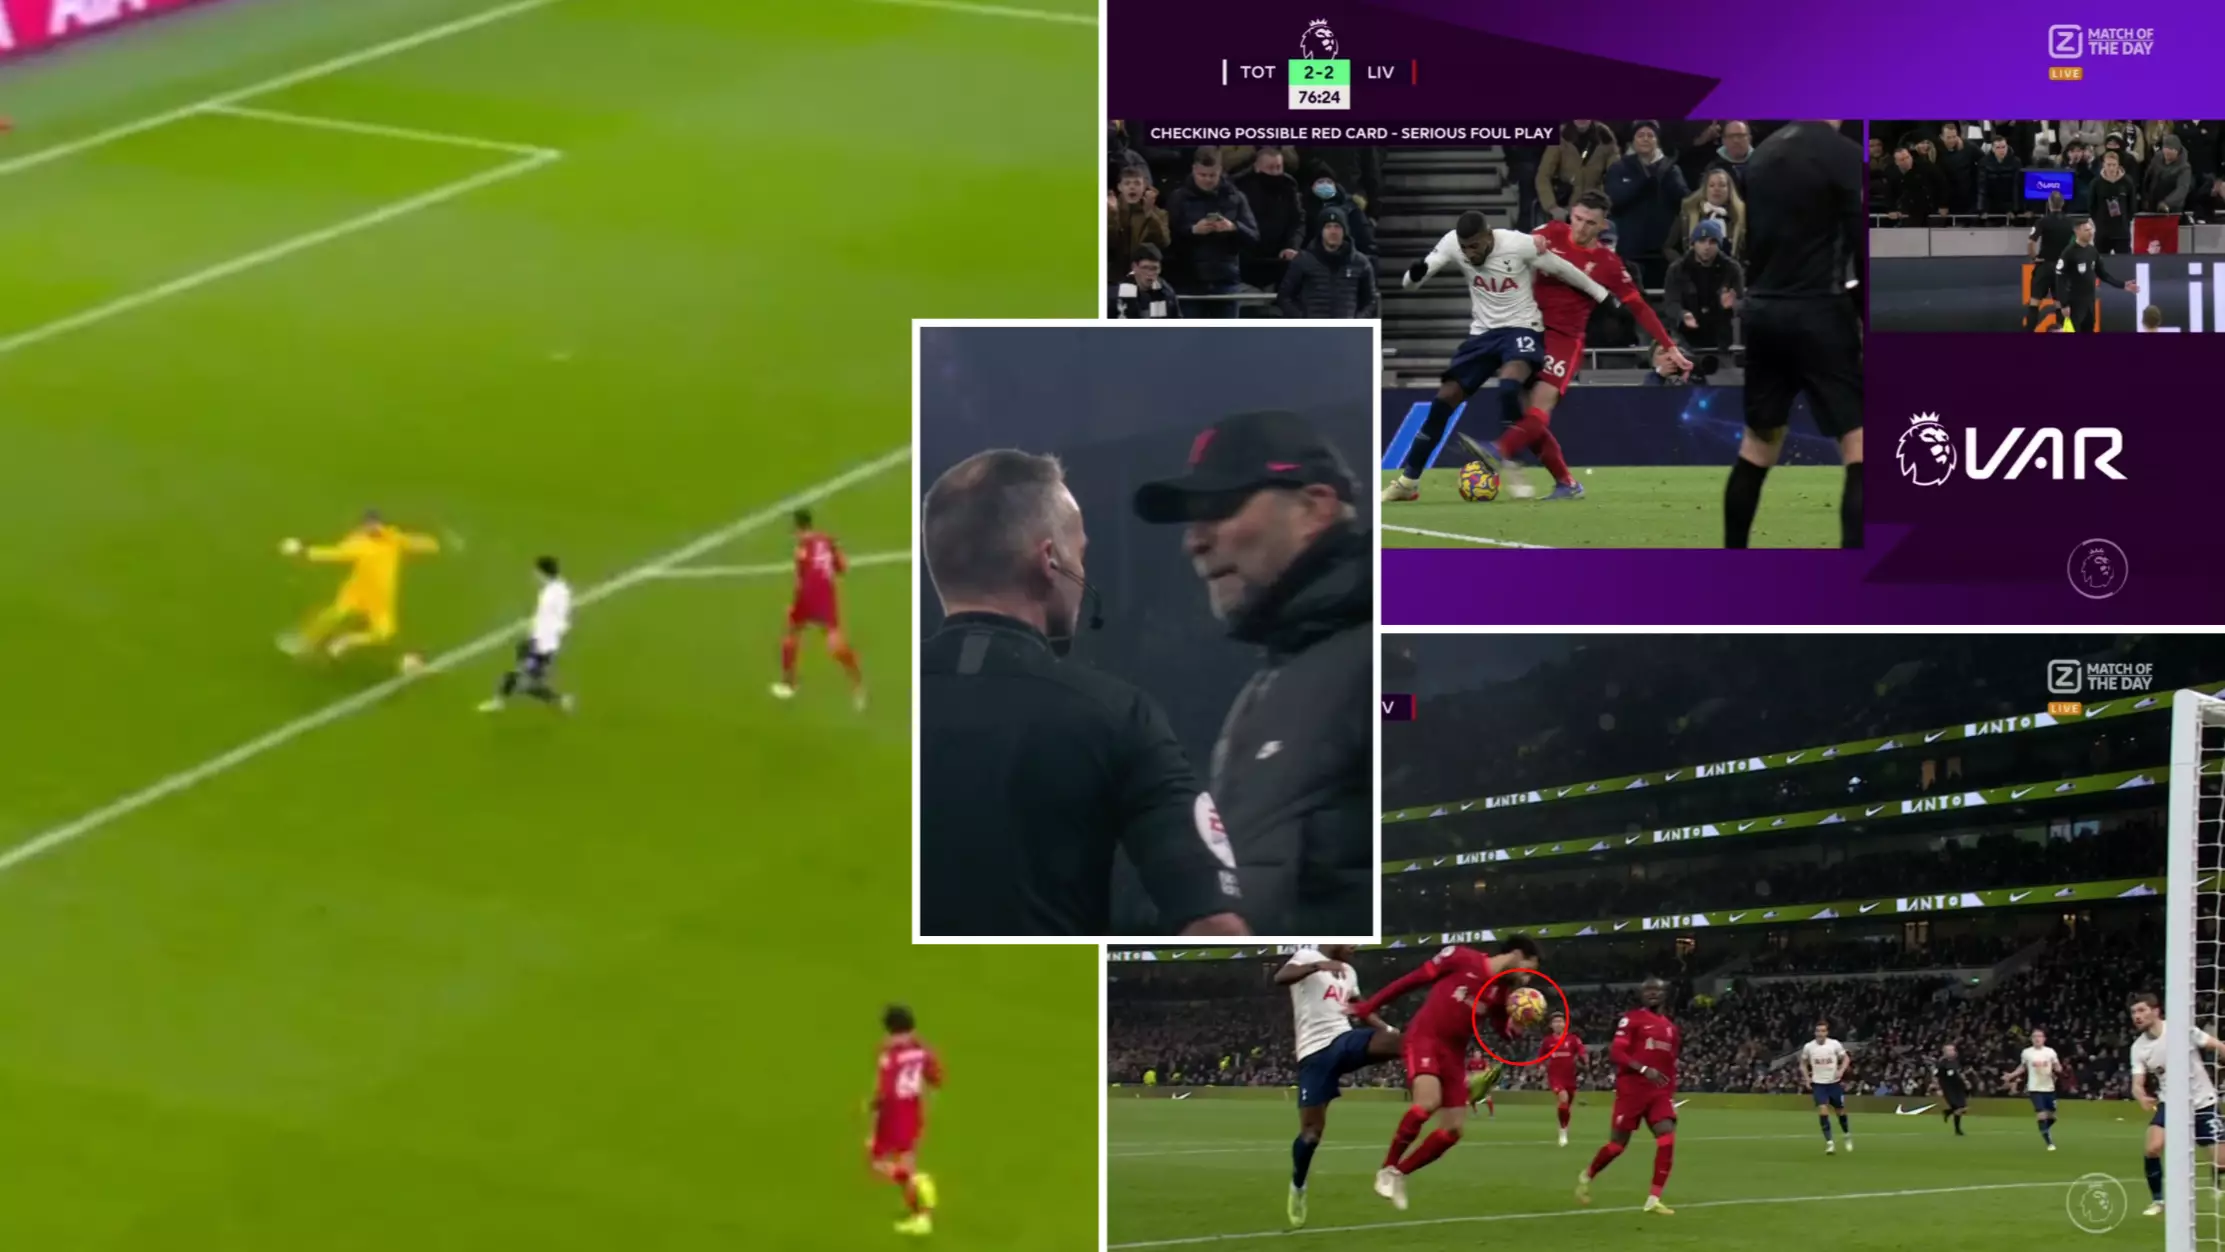 Tottenham And Liverpool Play Out Exhilarating 2-2 Draw In 'Game Of The Season'